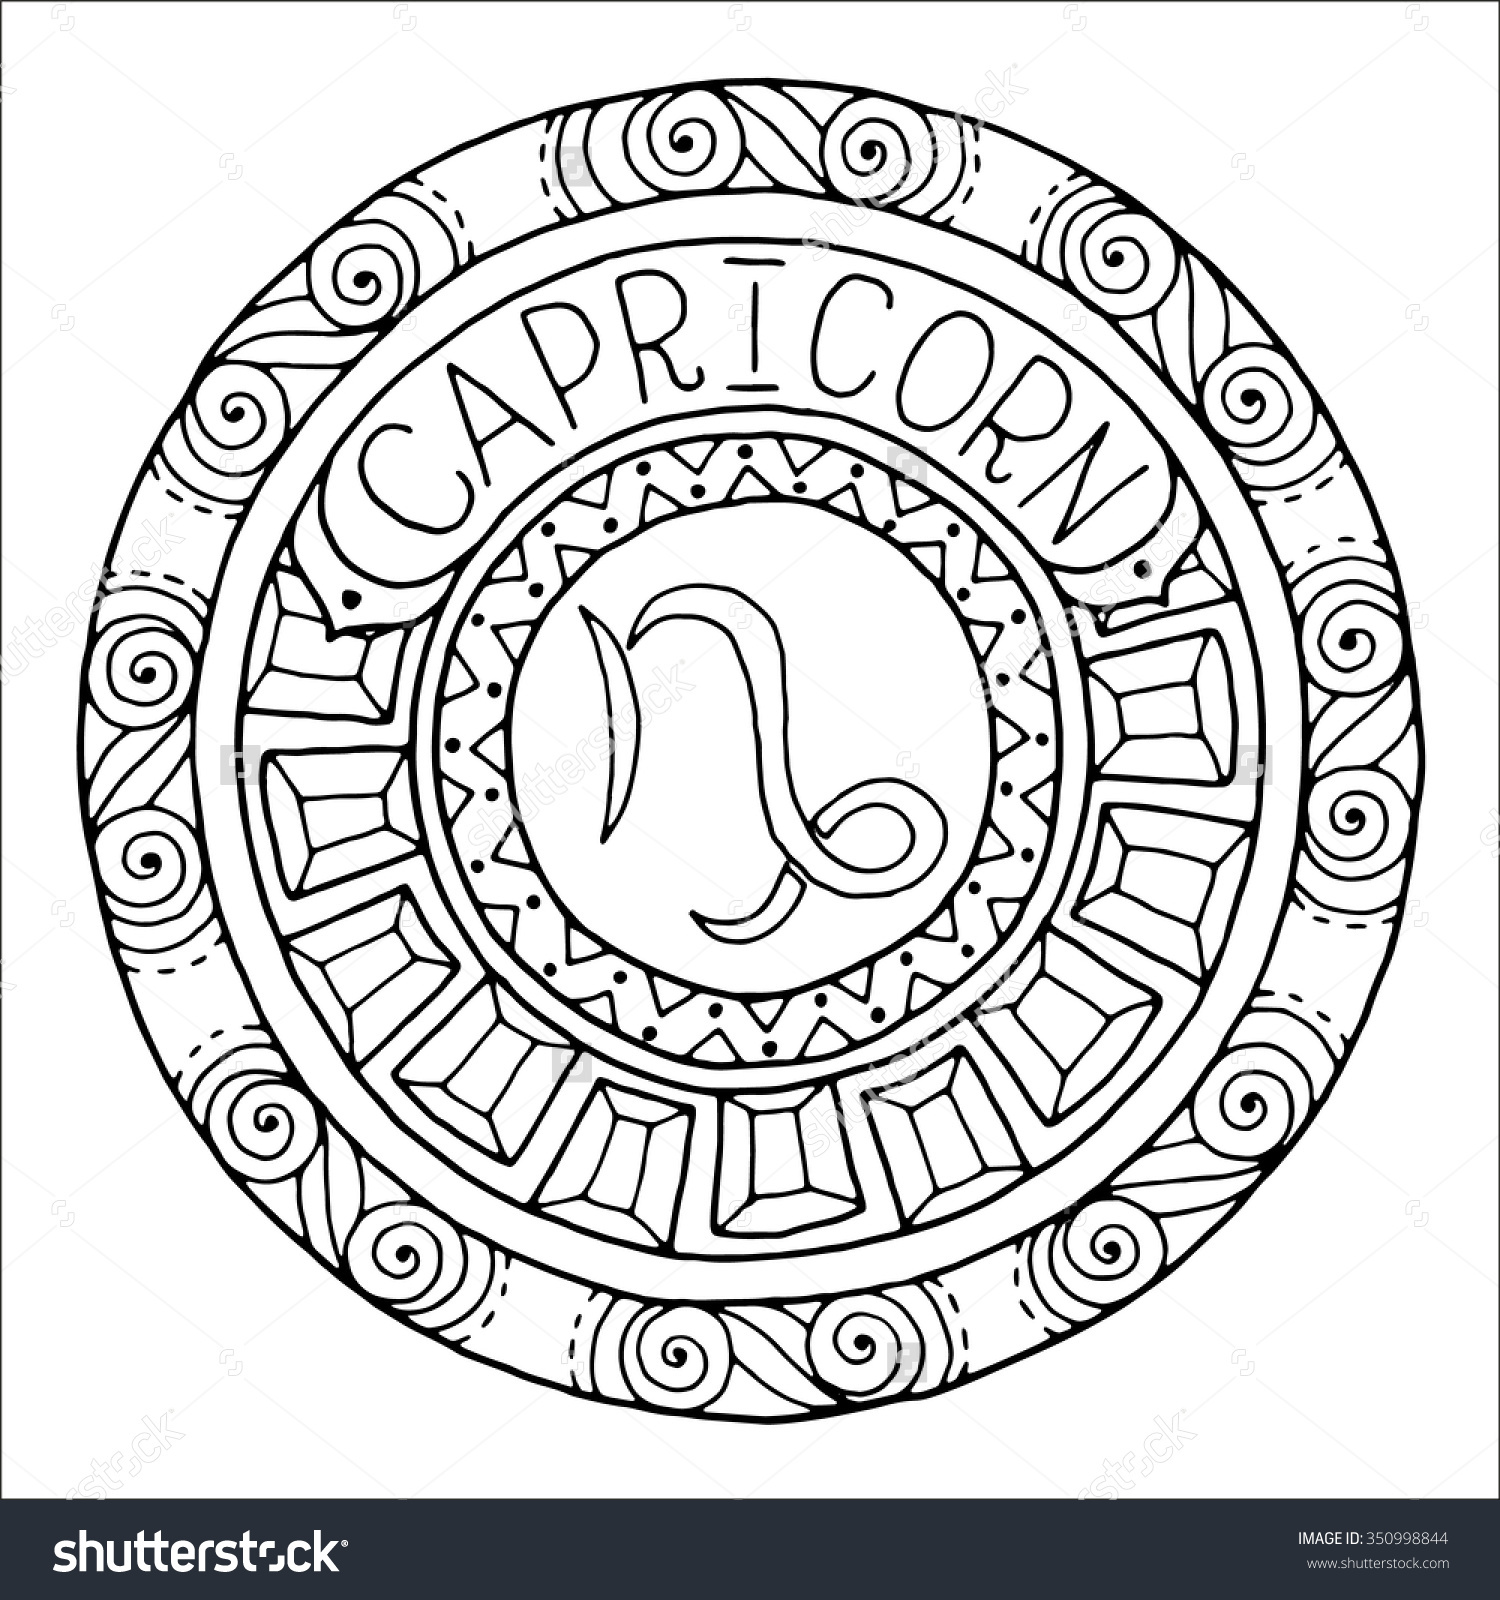 Capricorn Coloring Pages at GetColorings.com | Free printable colorings